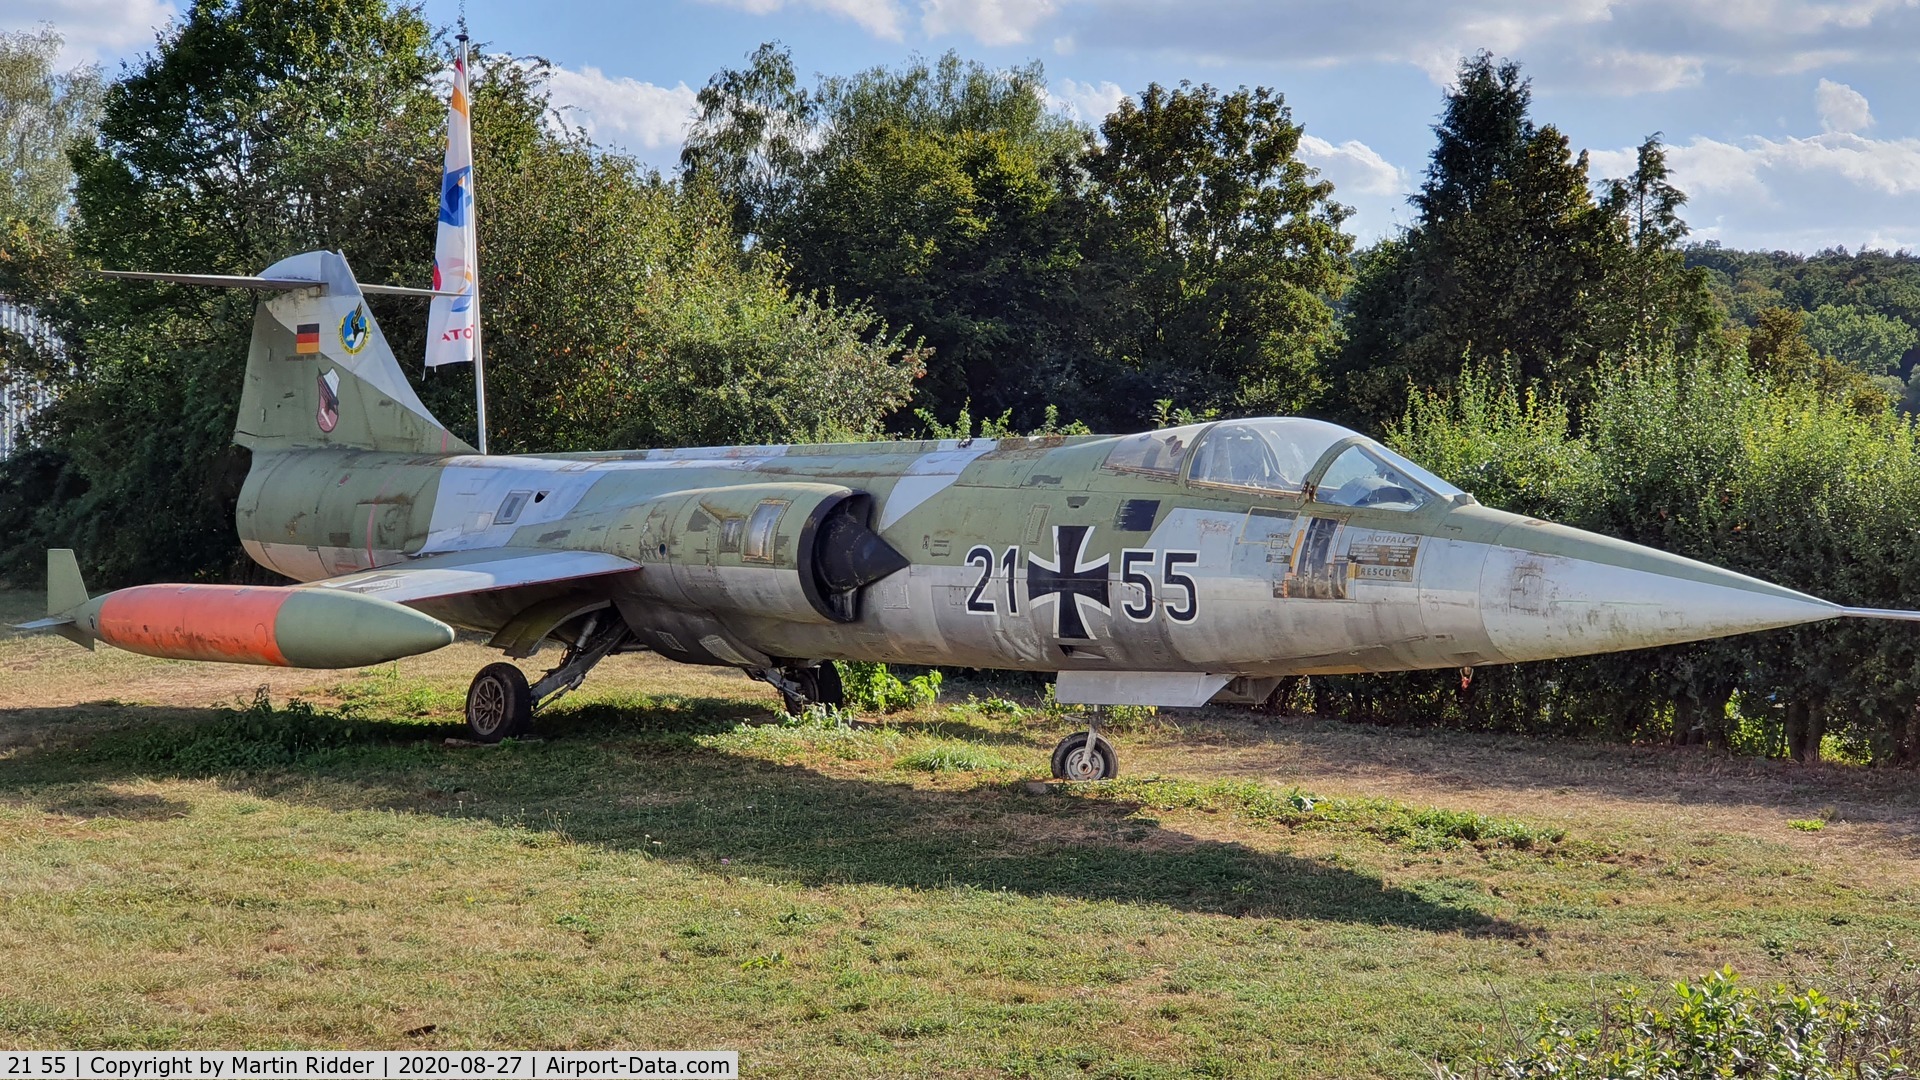 21 55, Lockheed F-104G Starfighter C/N 683-7024, The preserved F-104G 21+55 in Hassfurt found during a road bike tour last summer. It could need some restoration or repaint but it still is impressive. It is empty, sadly.